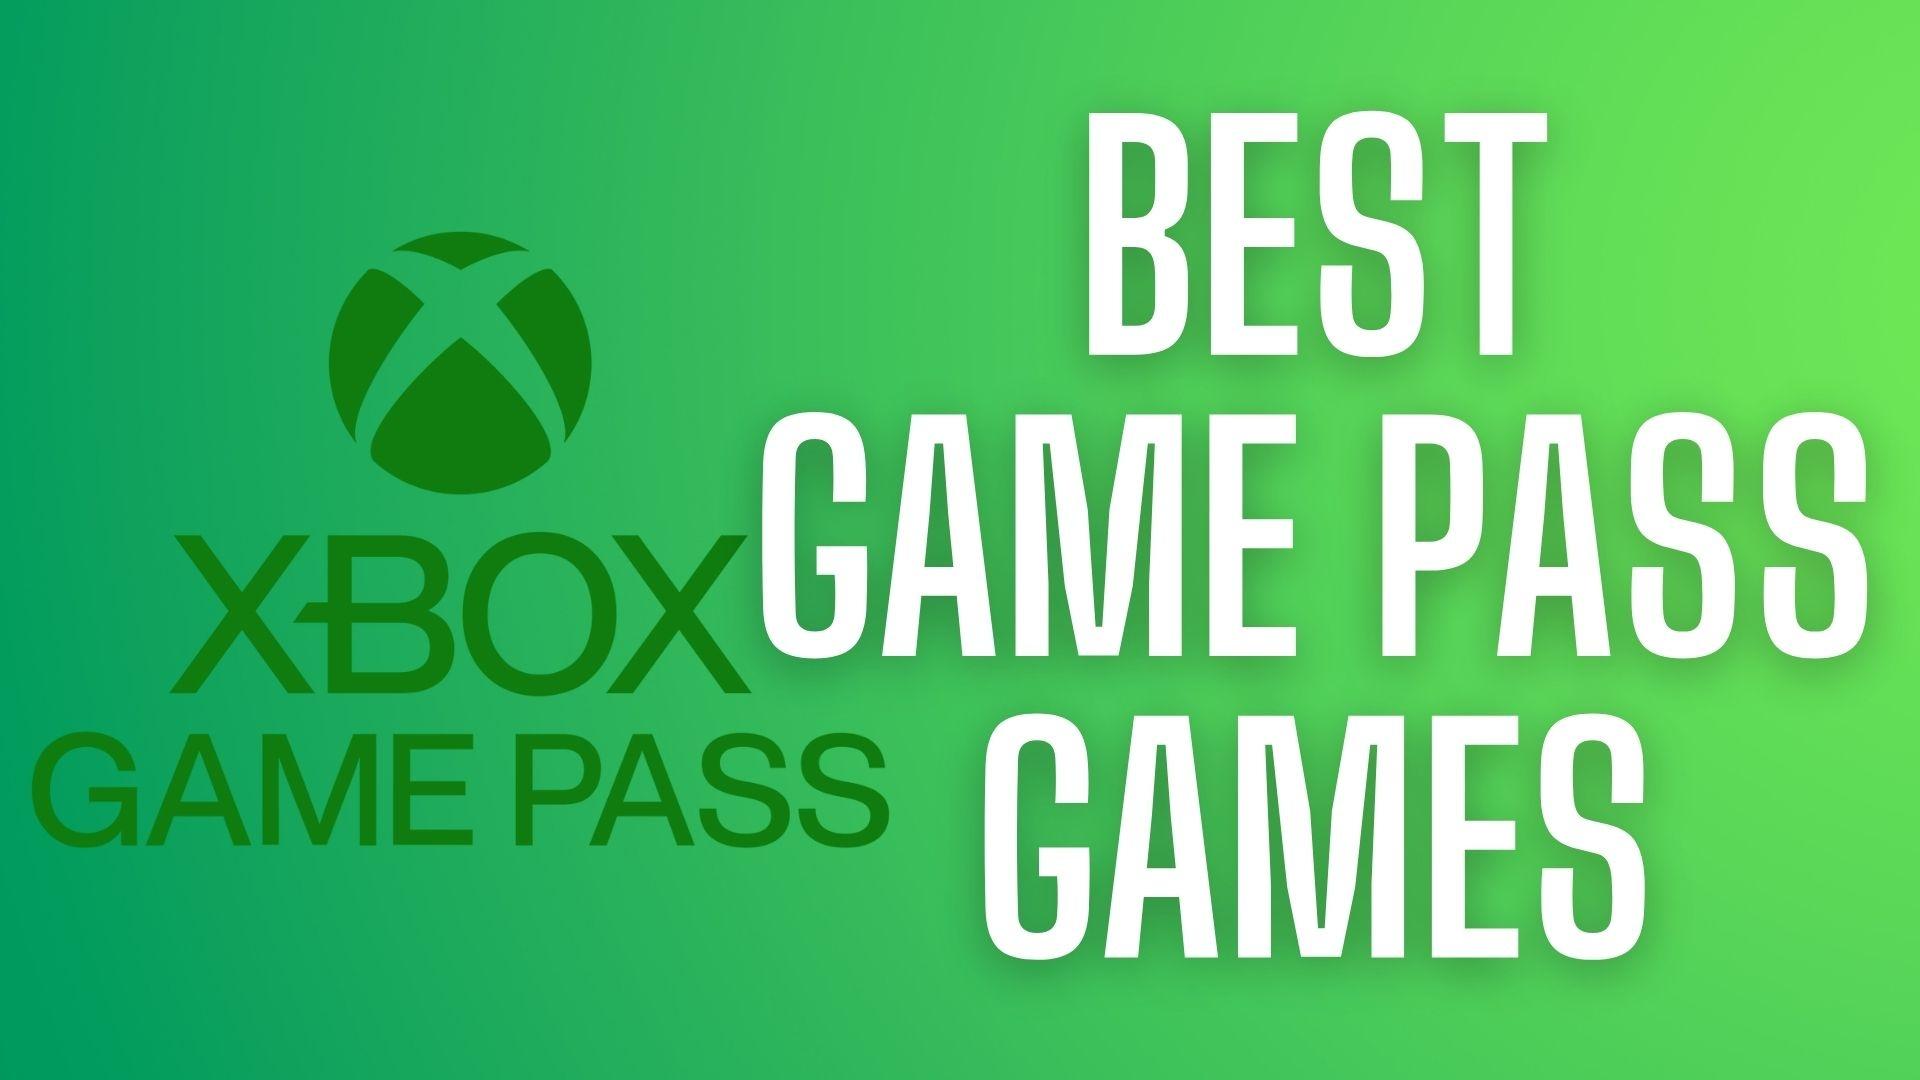 Best Game Pass Games: 7 Amazing Games to Play From Xbox Game Pass [July 2021]